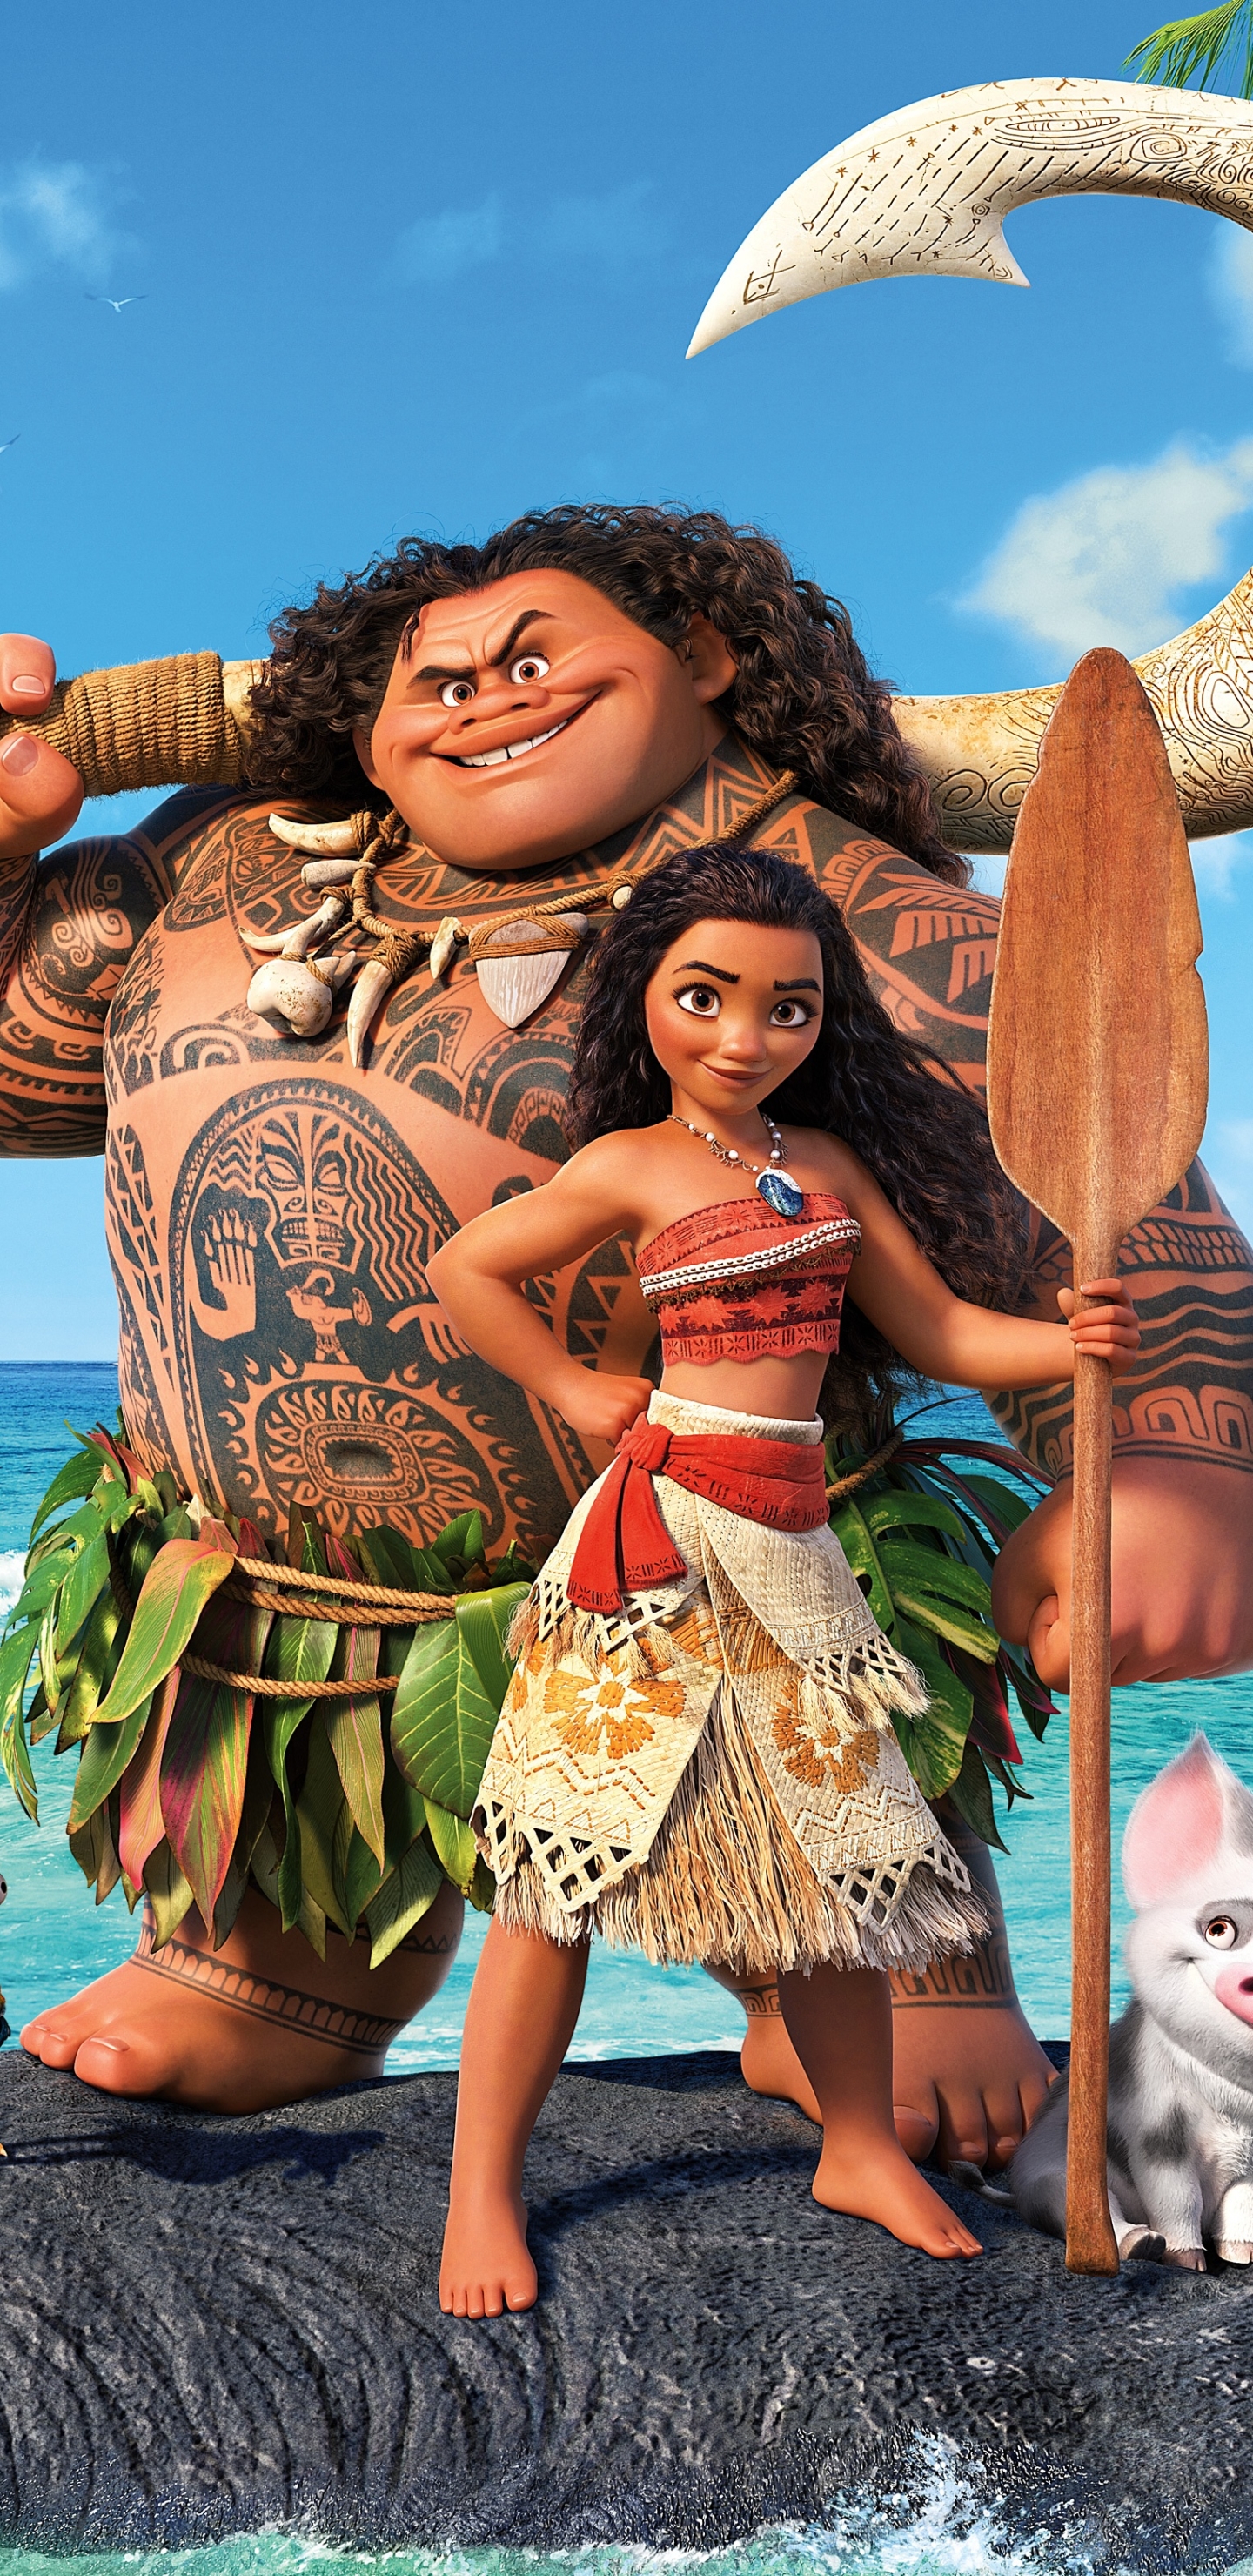 maui (moana), movie, moana, moana (movie), moana waialiki for android